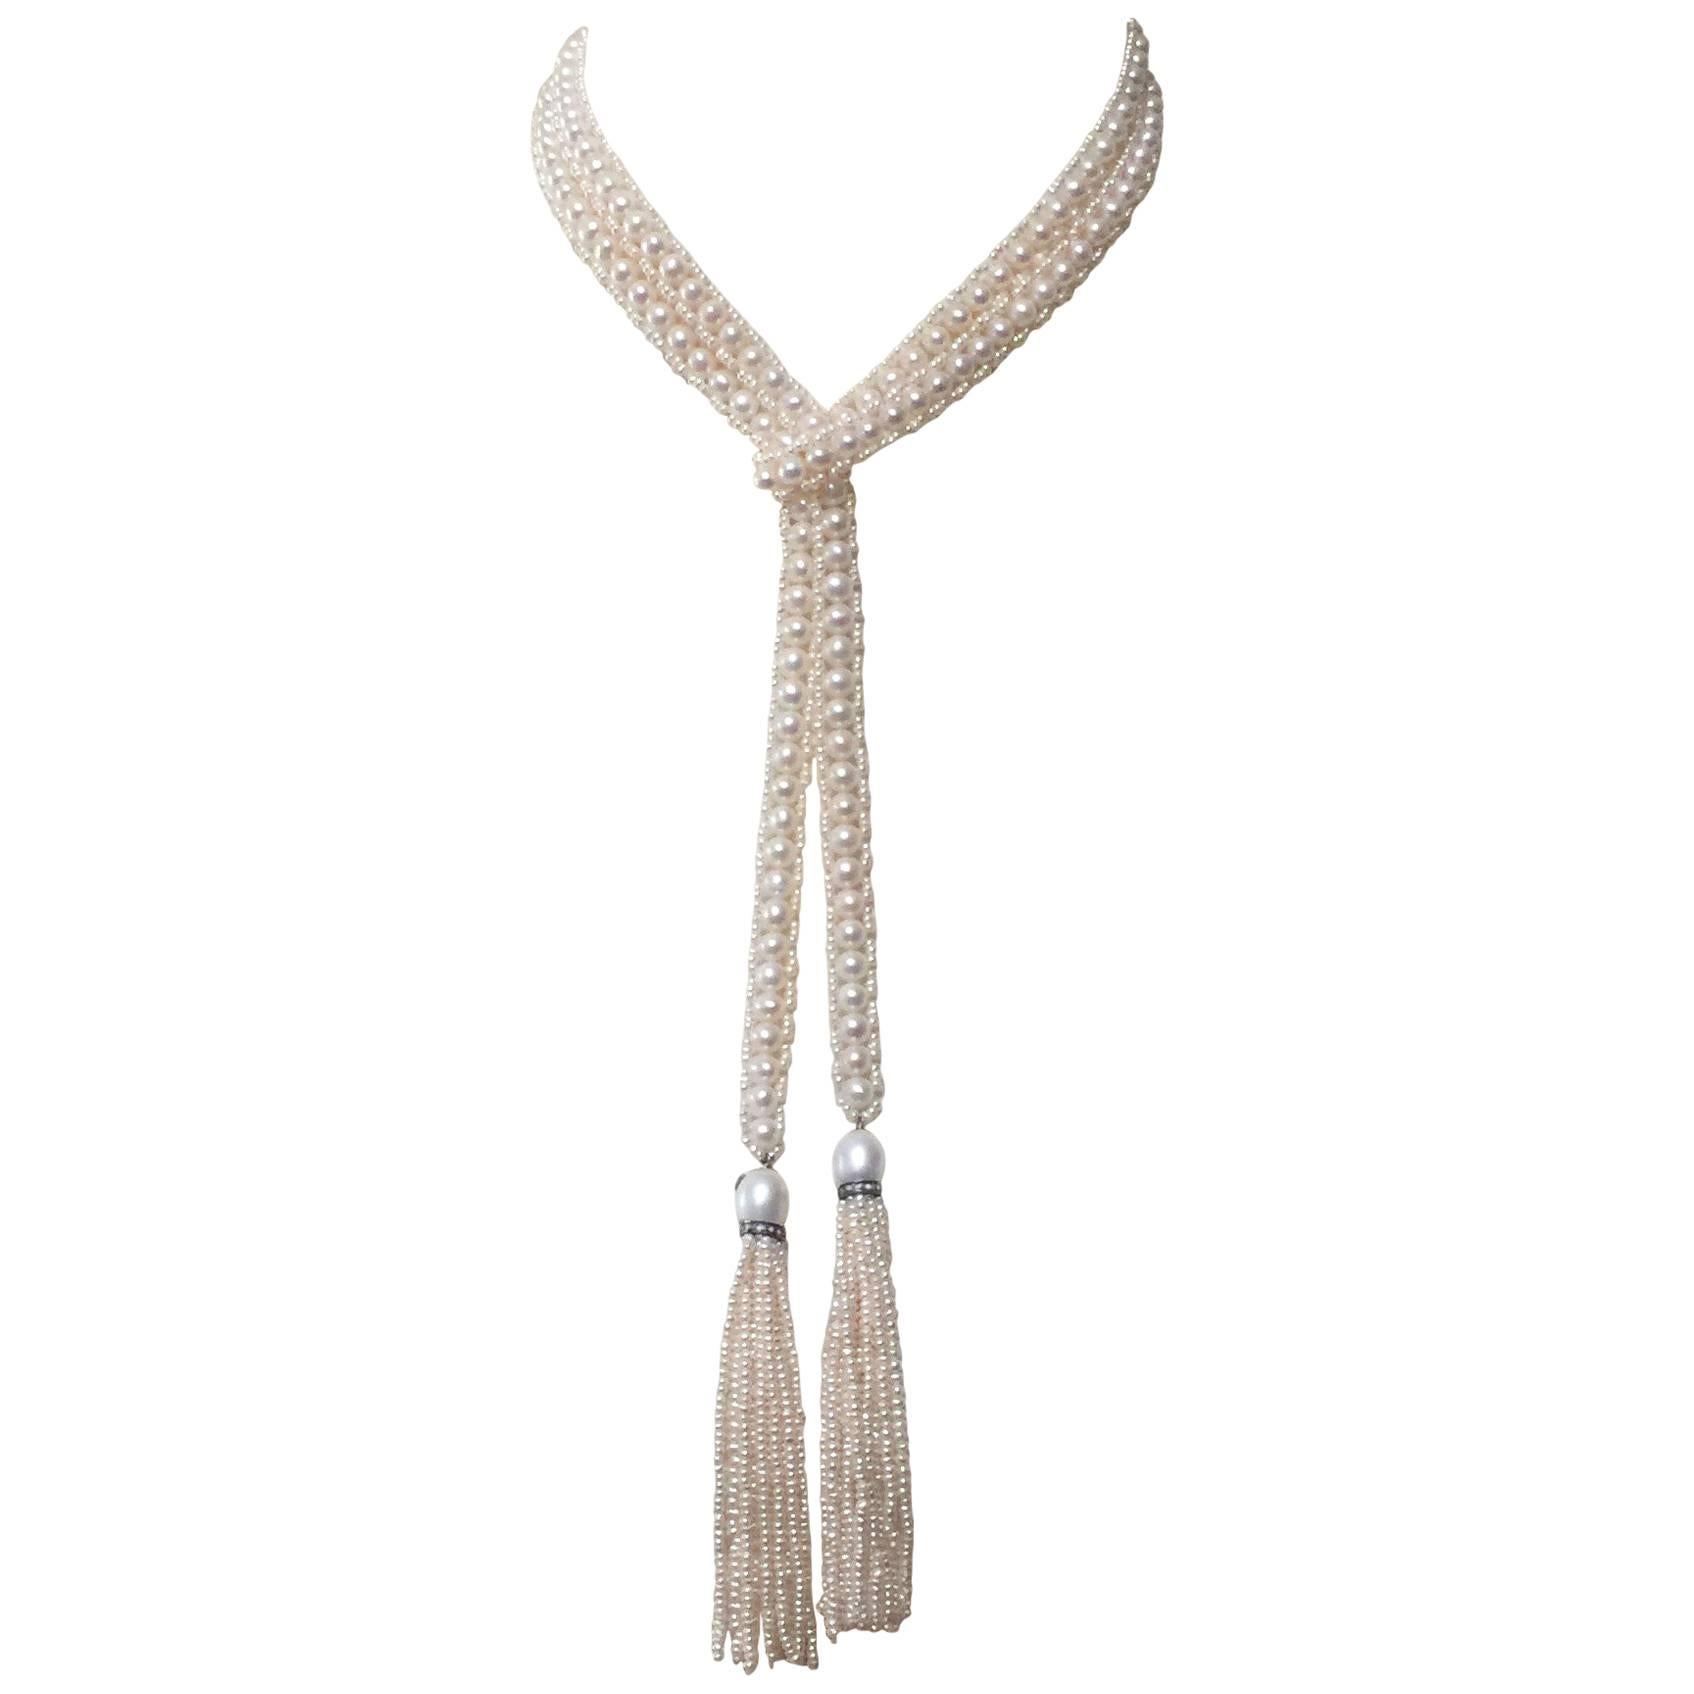 Marina J intricately Woven Pearl Sautoir with Pearl Tassels  Diamond rondales  For Sale